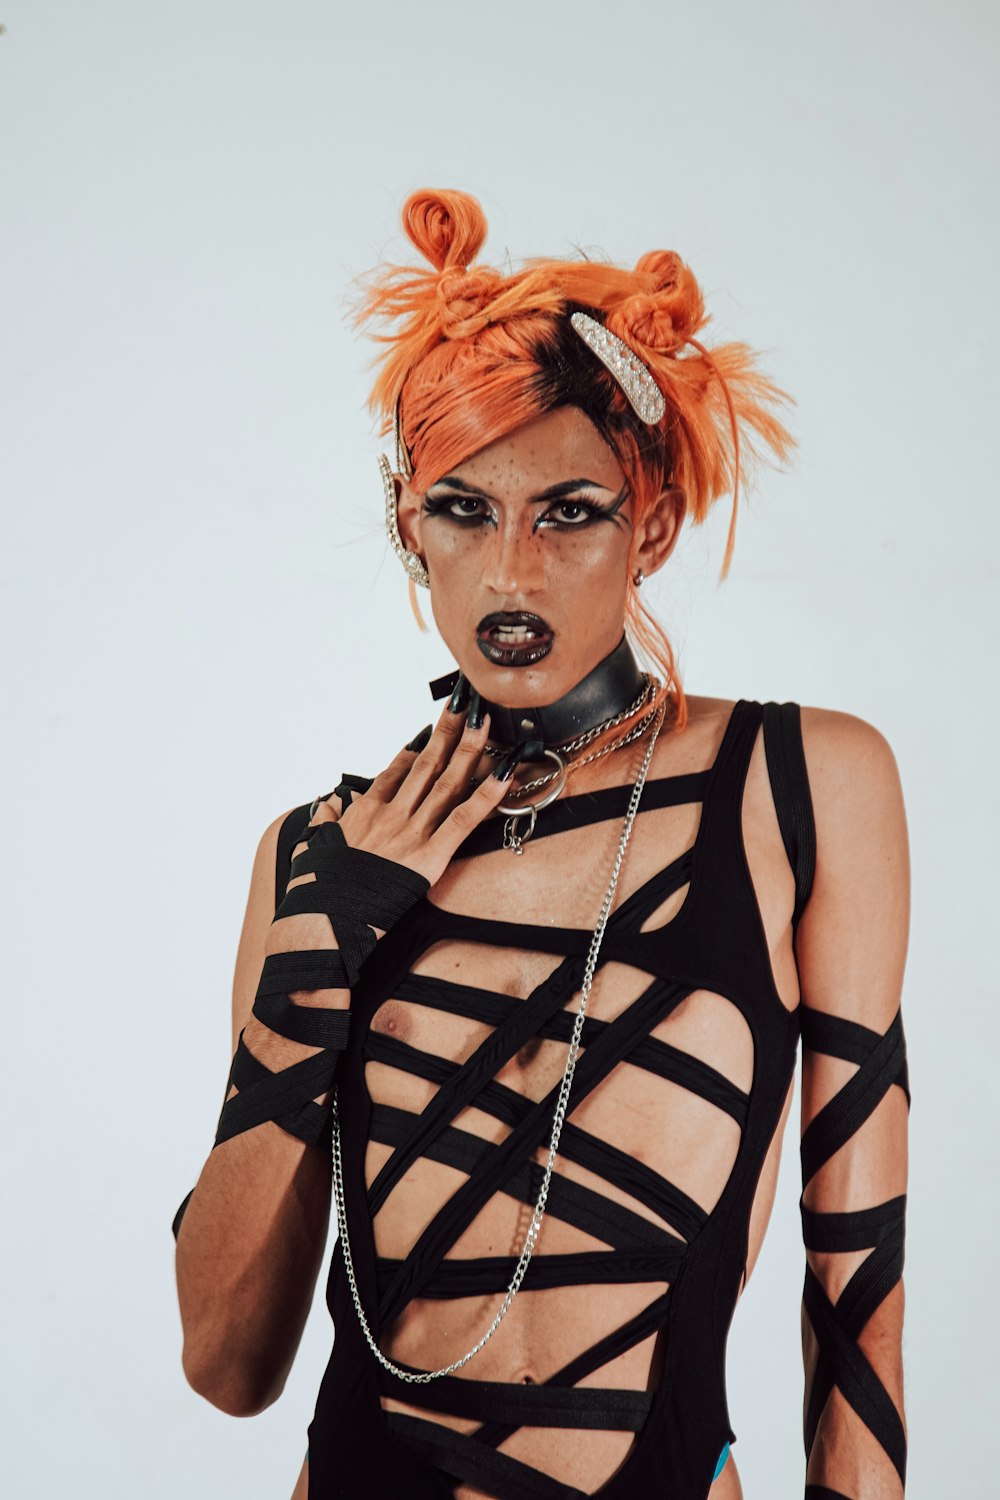 a woman with orange hair wearing a black outfit